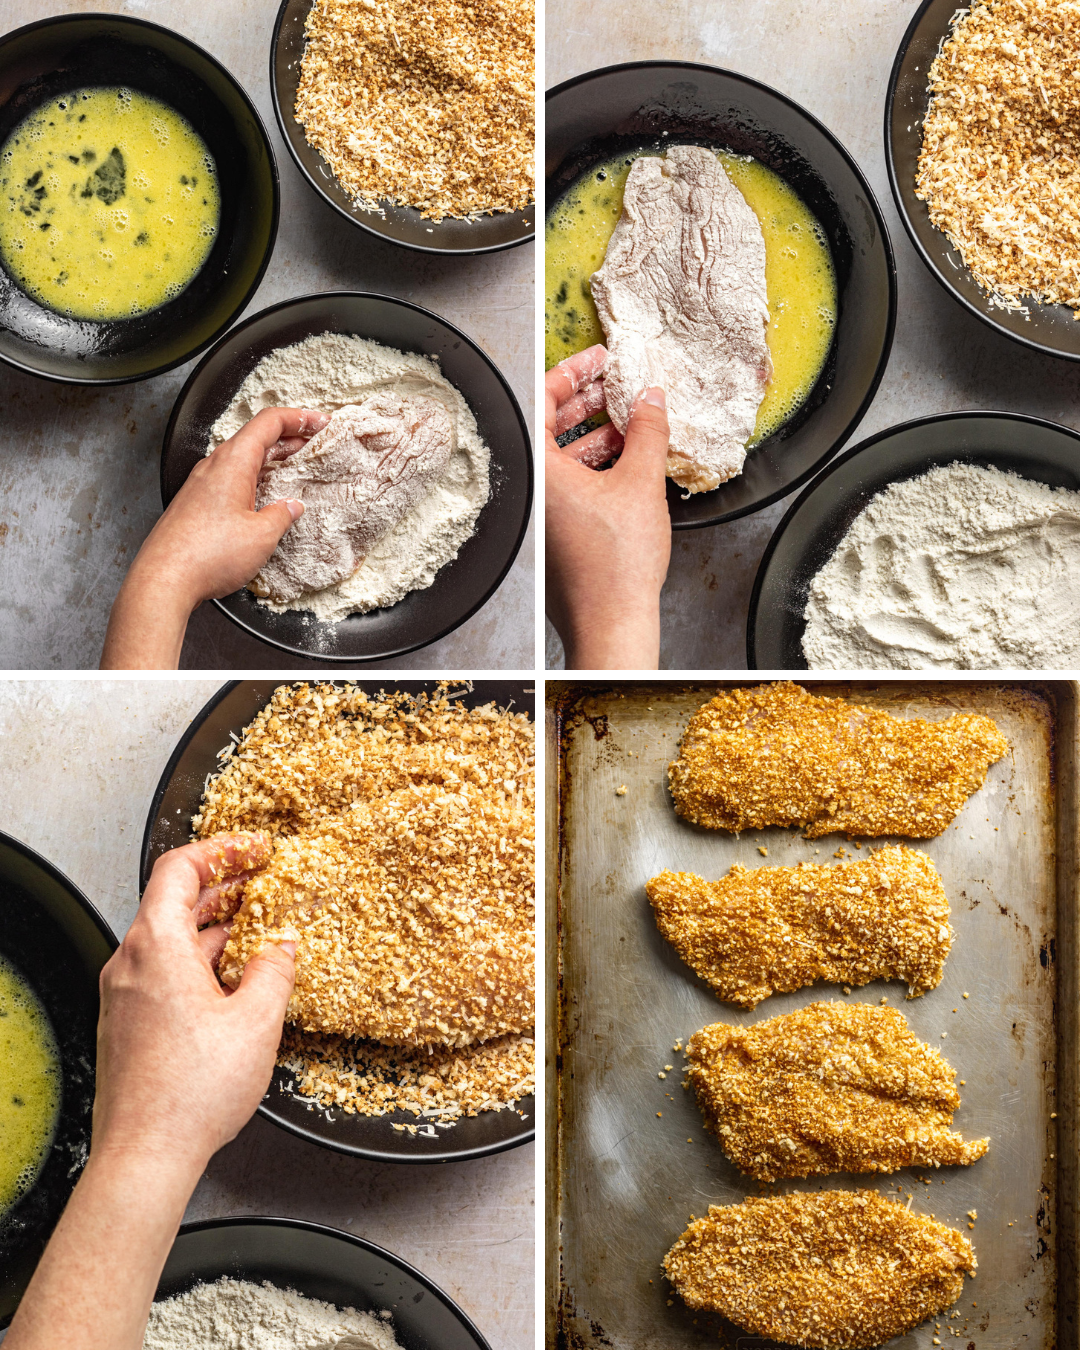 Step by step assembly of panko crusted chicken